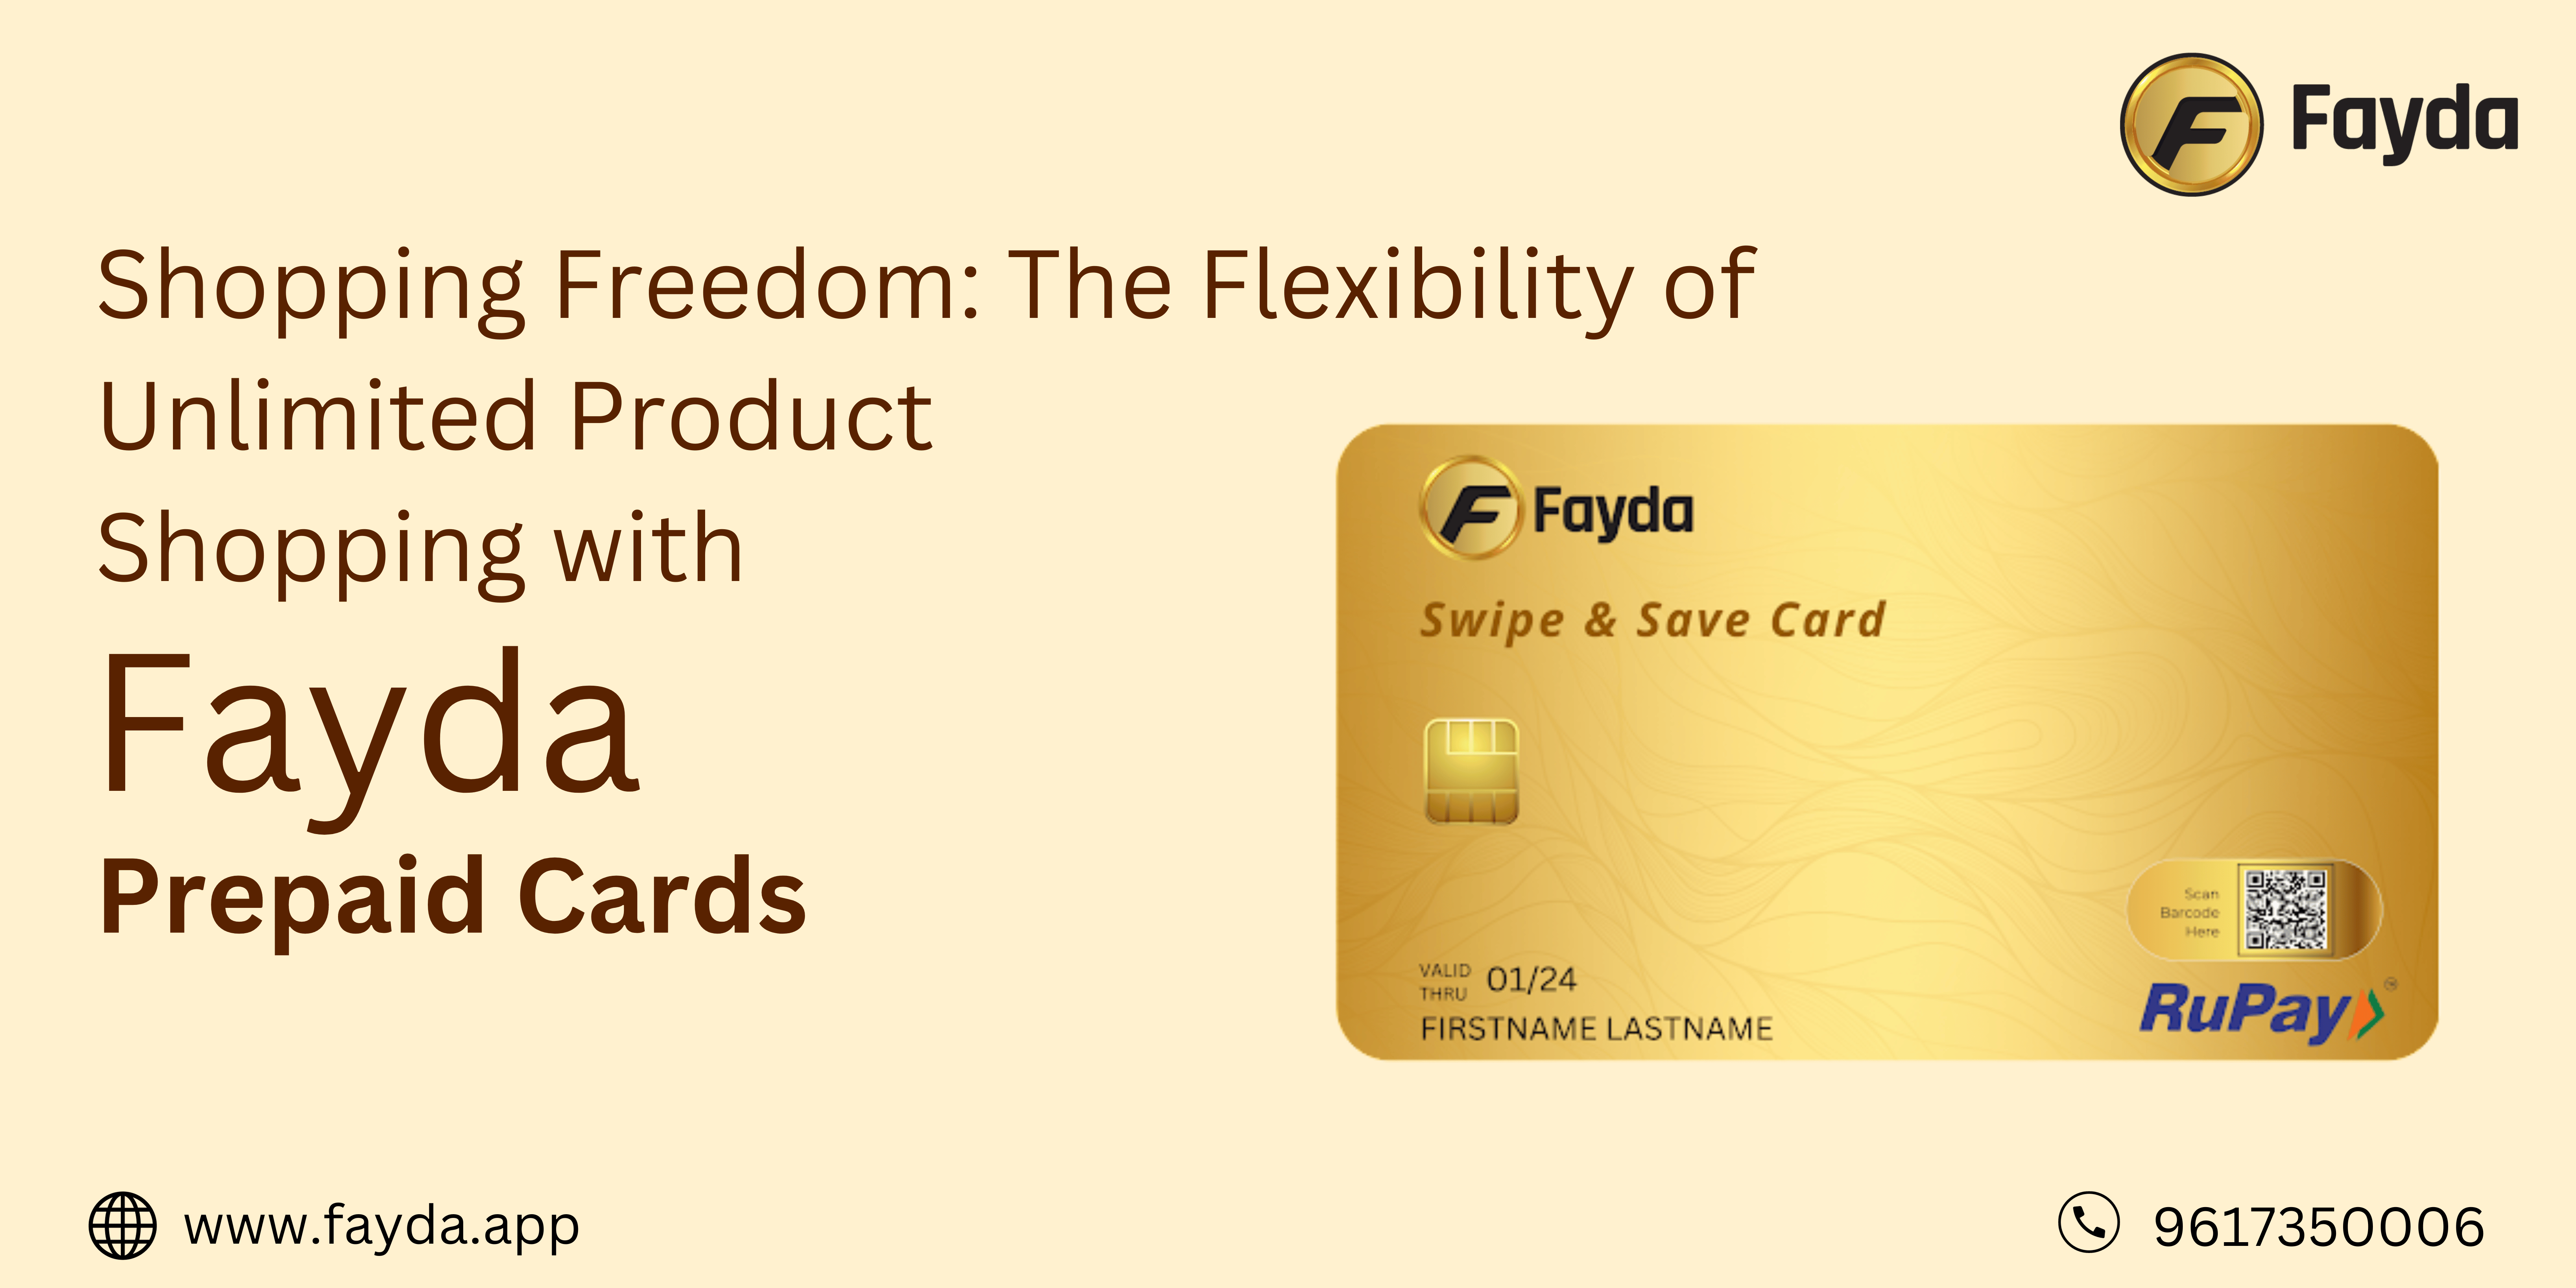 Shopping Freedom: The Flexibility of Unlimited Product Shopping with Fayda Prepaid Cards